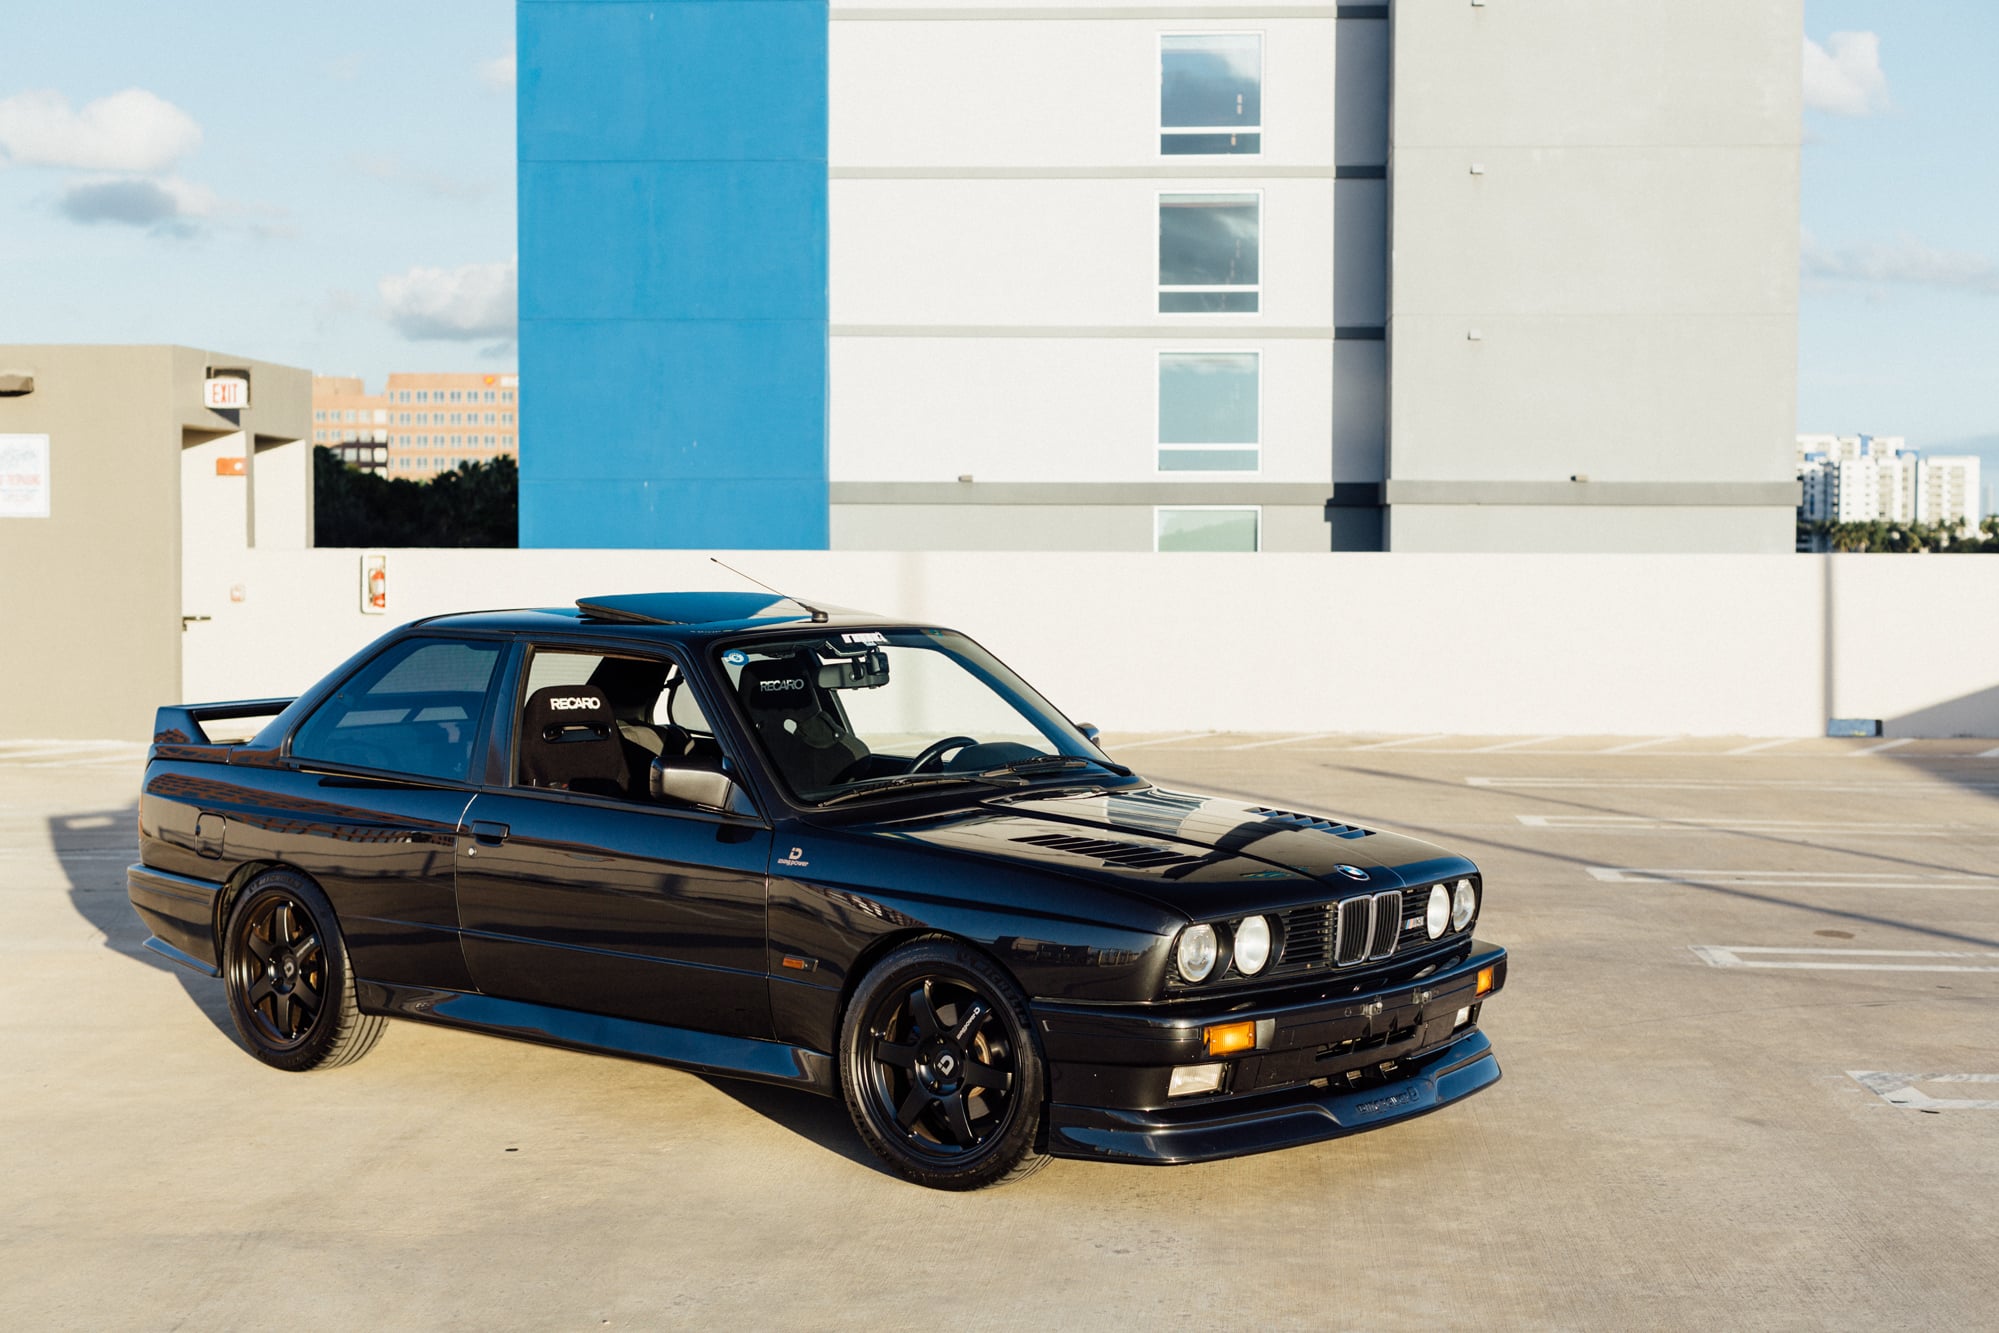 1989 BMW M3 S2+A (E30) by Iding Power | Blue printed S14 | Iding TE37s | Beautifully Preserved | Incredibly well-documented build & maintenance history